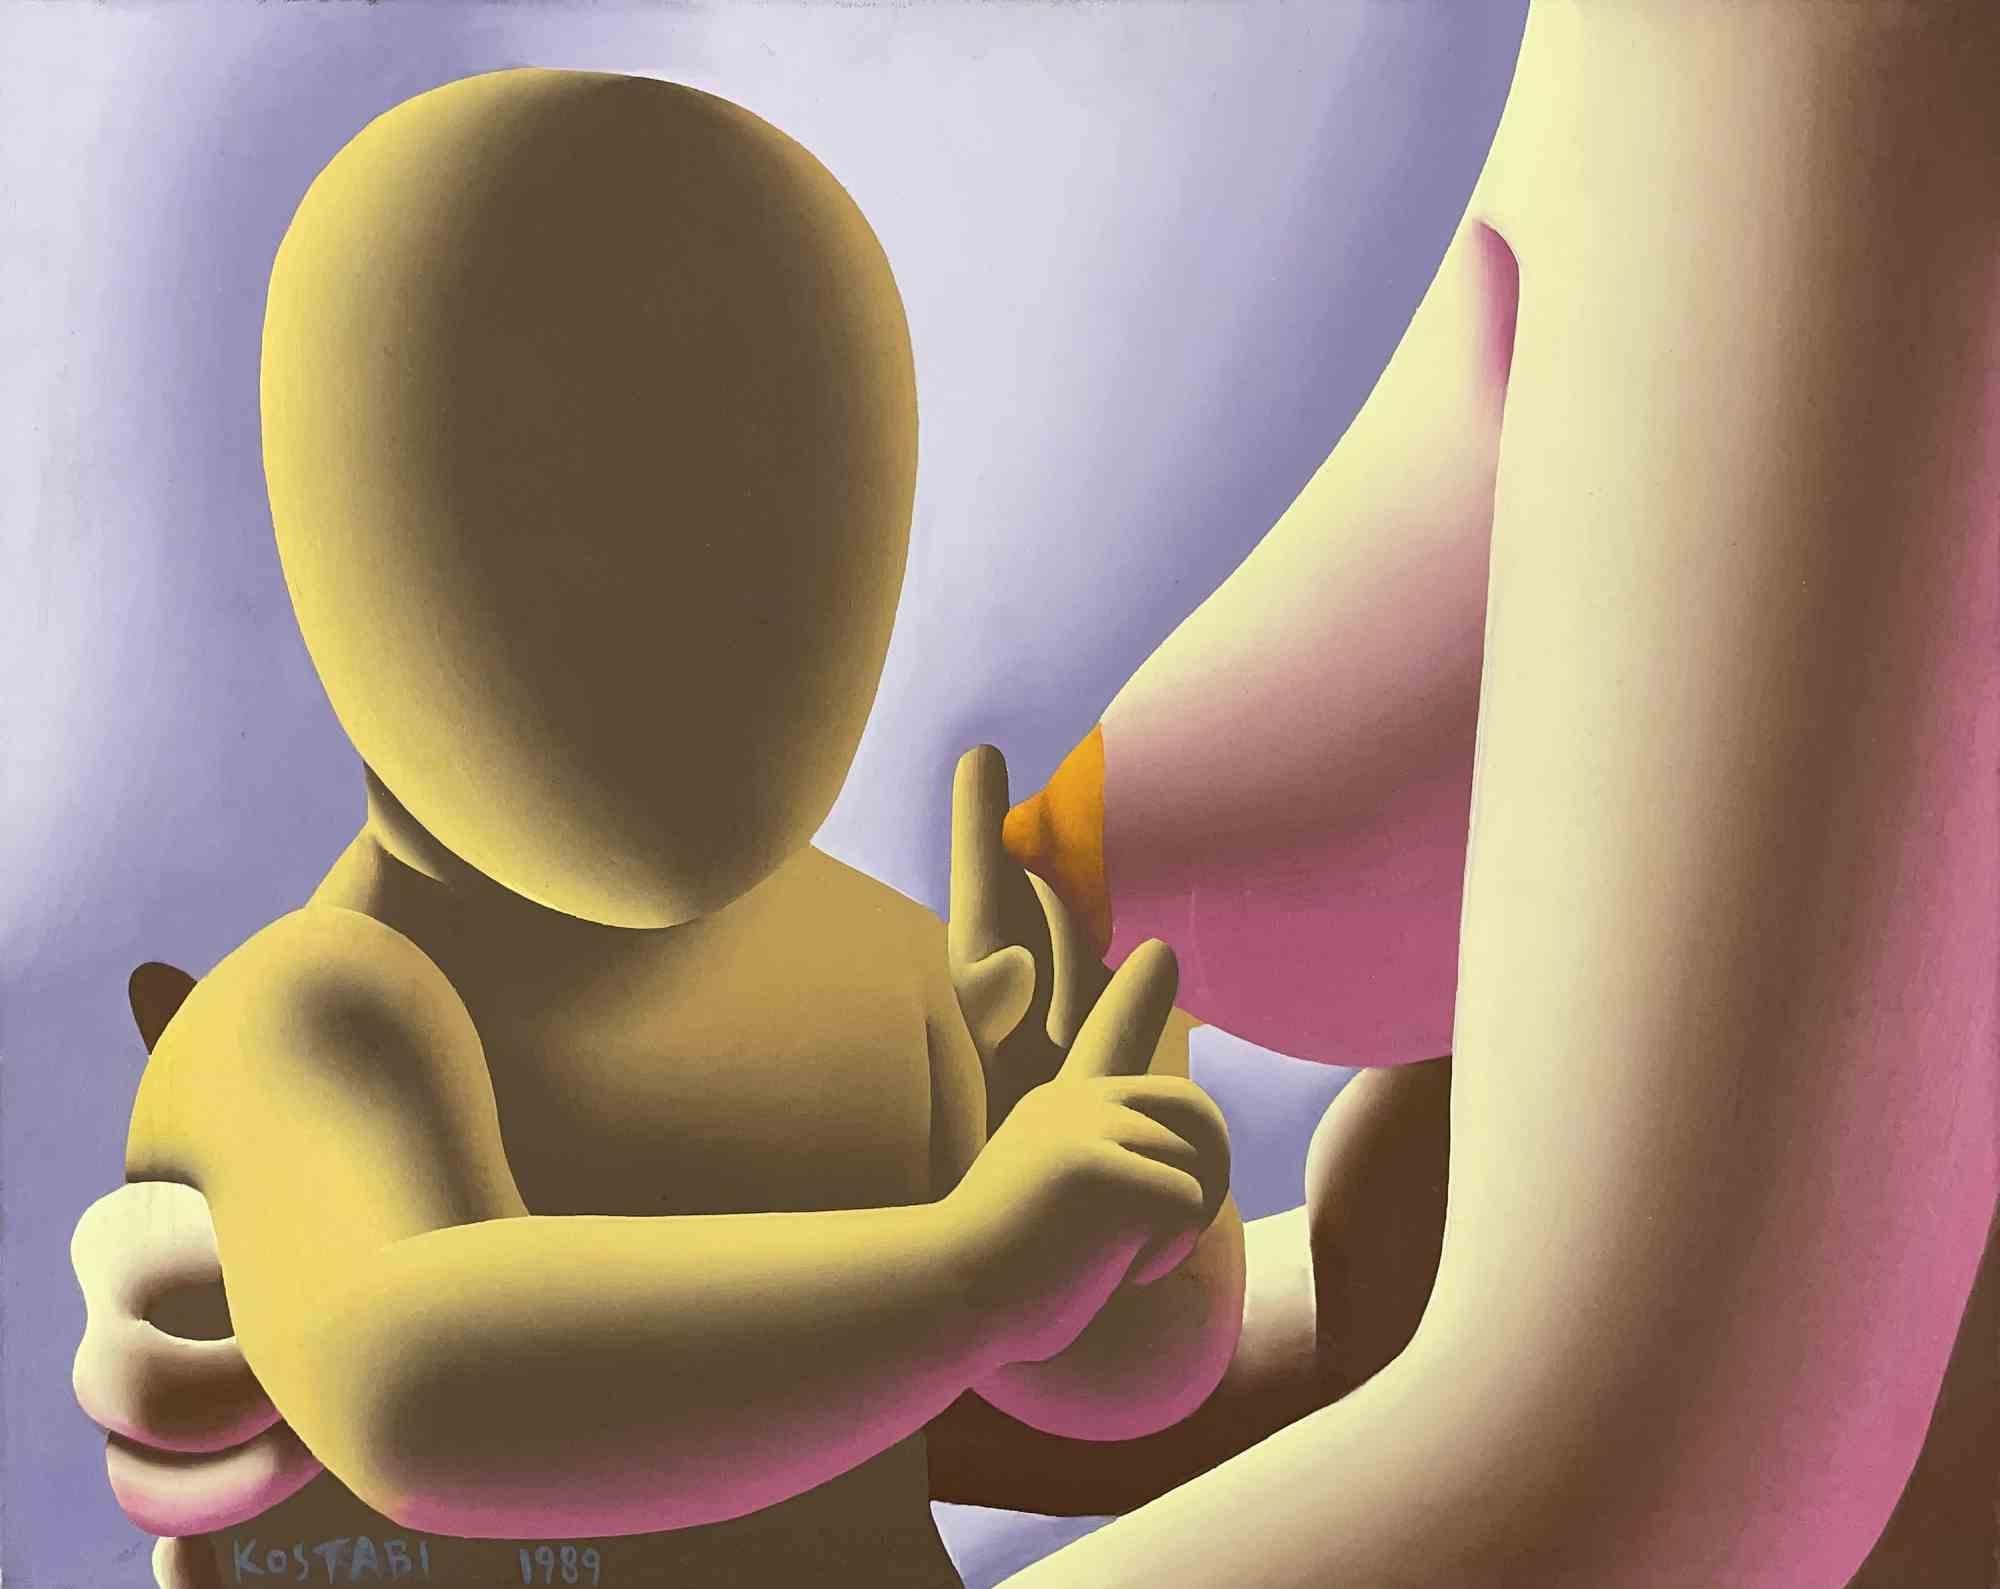 Baby Pollock is an artwork by Mark Kostabi in 1989. 

Mixed Media on Canvas.

cm. 24x30. 

Good conditions!

 

Mark Kostabi (Los Angeles, November 27, 1960) is an American painter and composer. Mark Kostabi was born into a family of Estonian